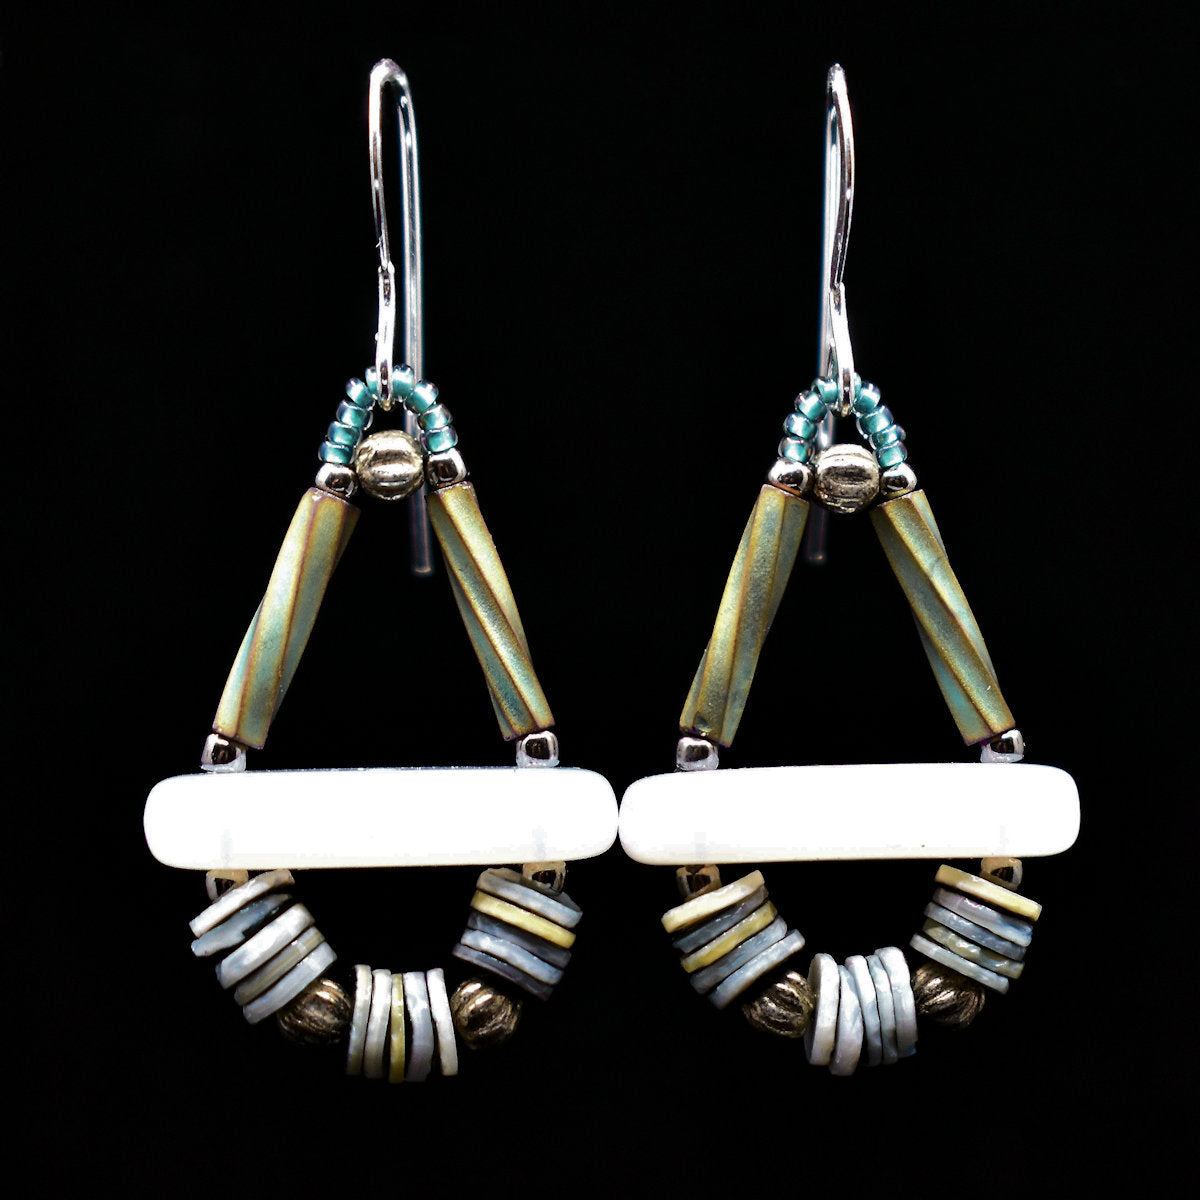 Silver, white and ocean colored earrings on a black background. The earrings have a triangle shape on top, with two iridescent green upright sides and a white bar at the base. Below the bar is an arc formed by three sections of blue-gray shell discs alternating with round silver beads.